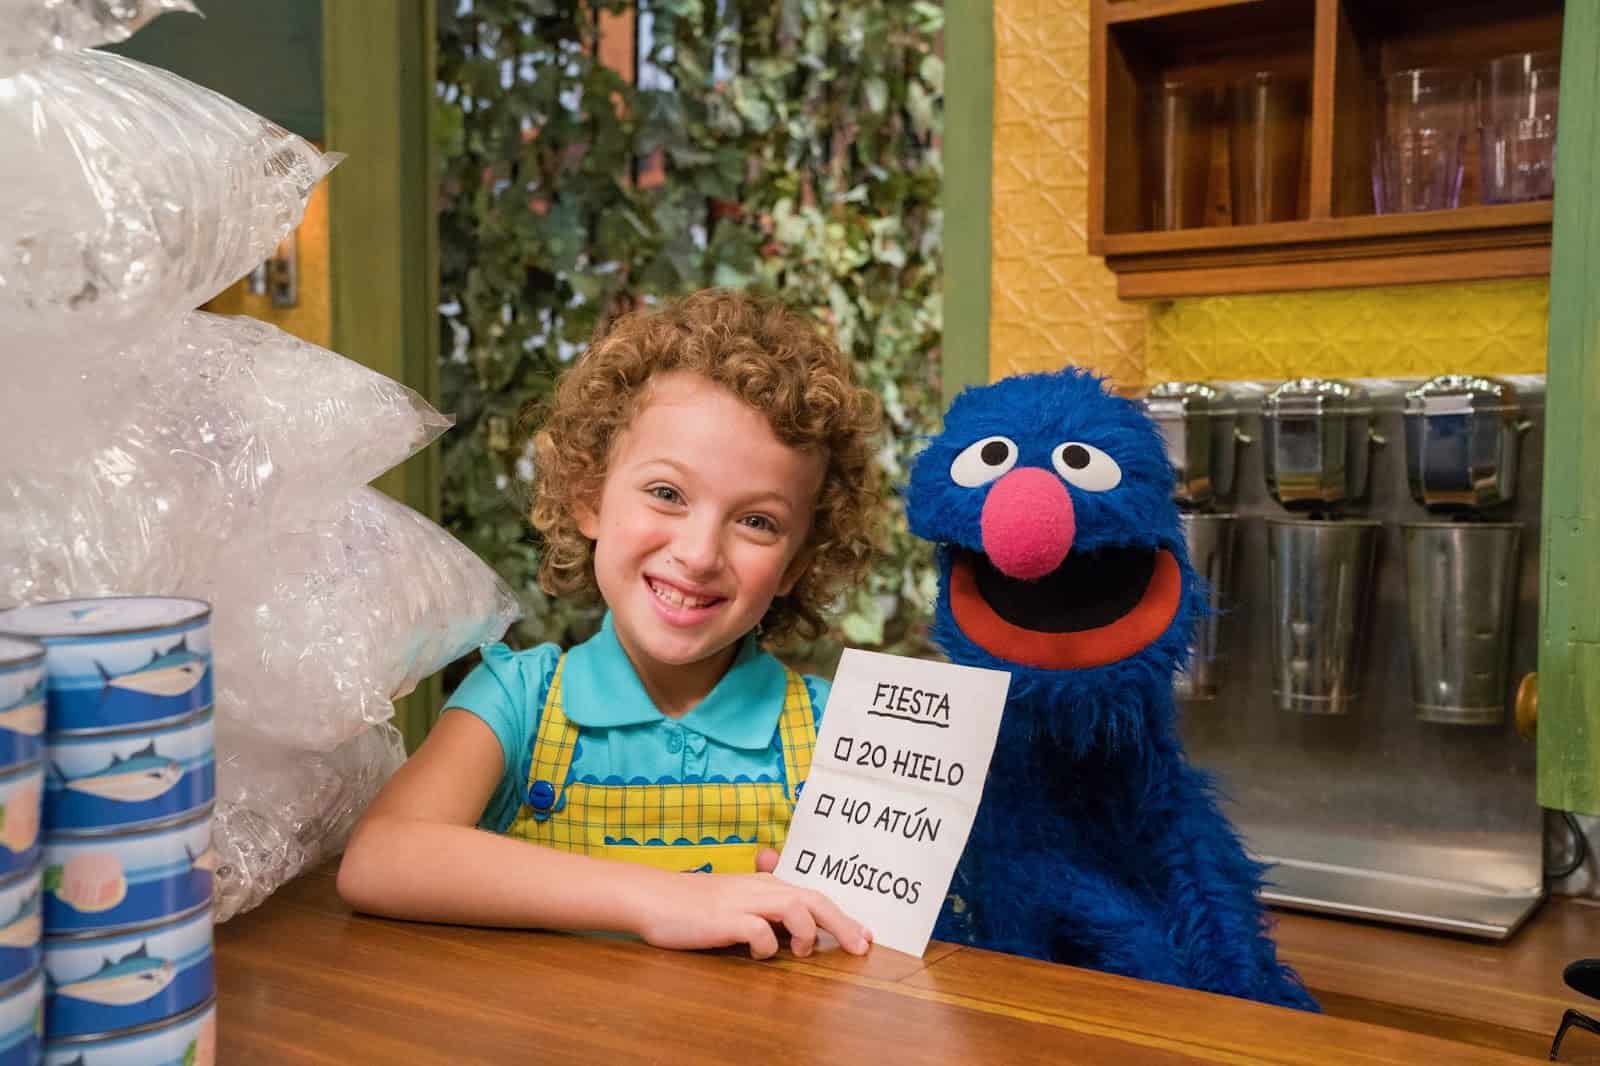 A young girl learning Spanish with Grover in this image from Sesame Workshop